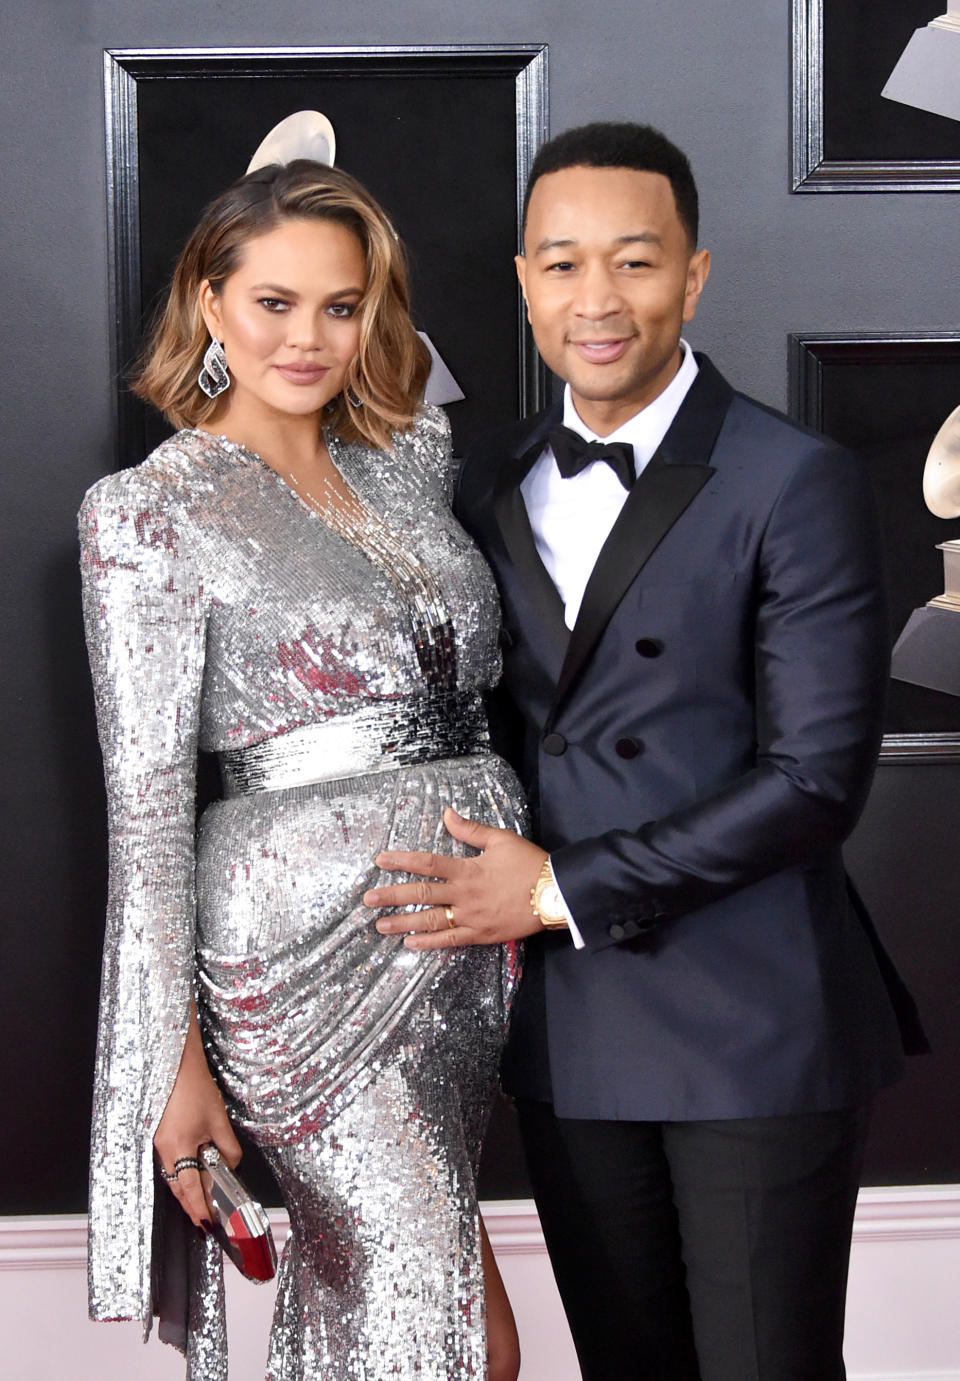 Chrissy Teigen and John Legend at the Grammy Awards Sunday night. (Photo: Getty Images)